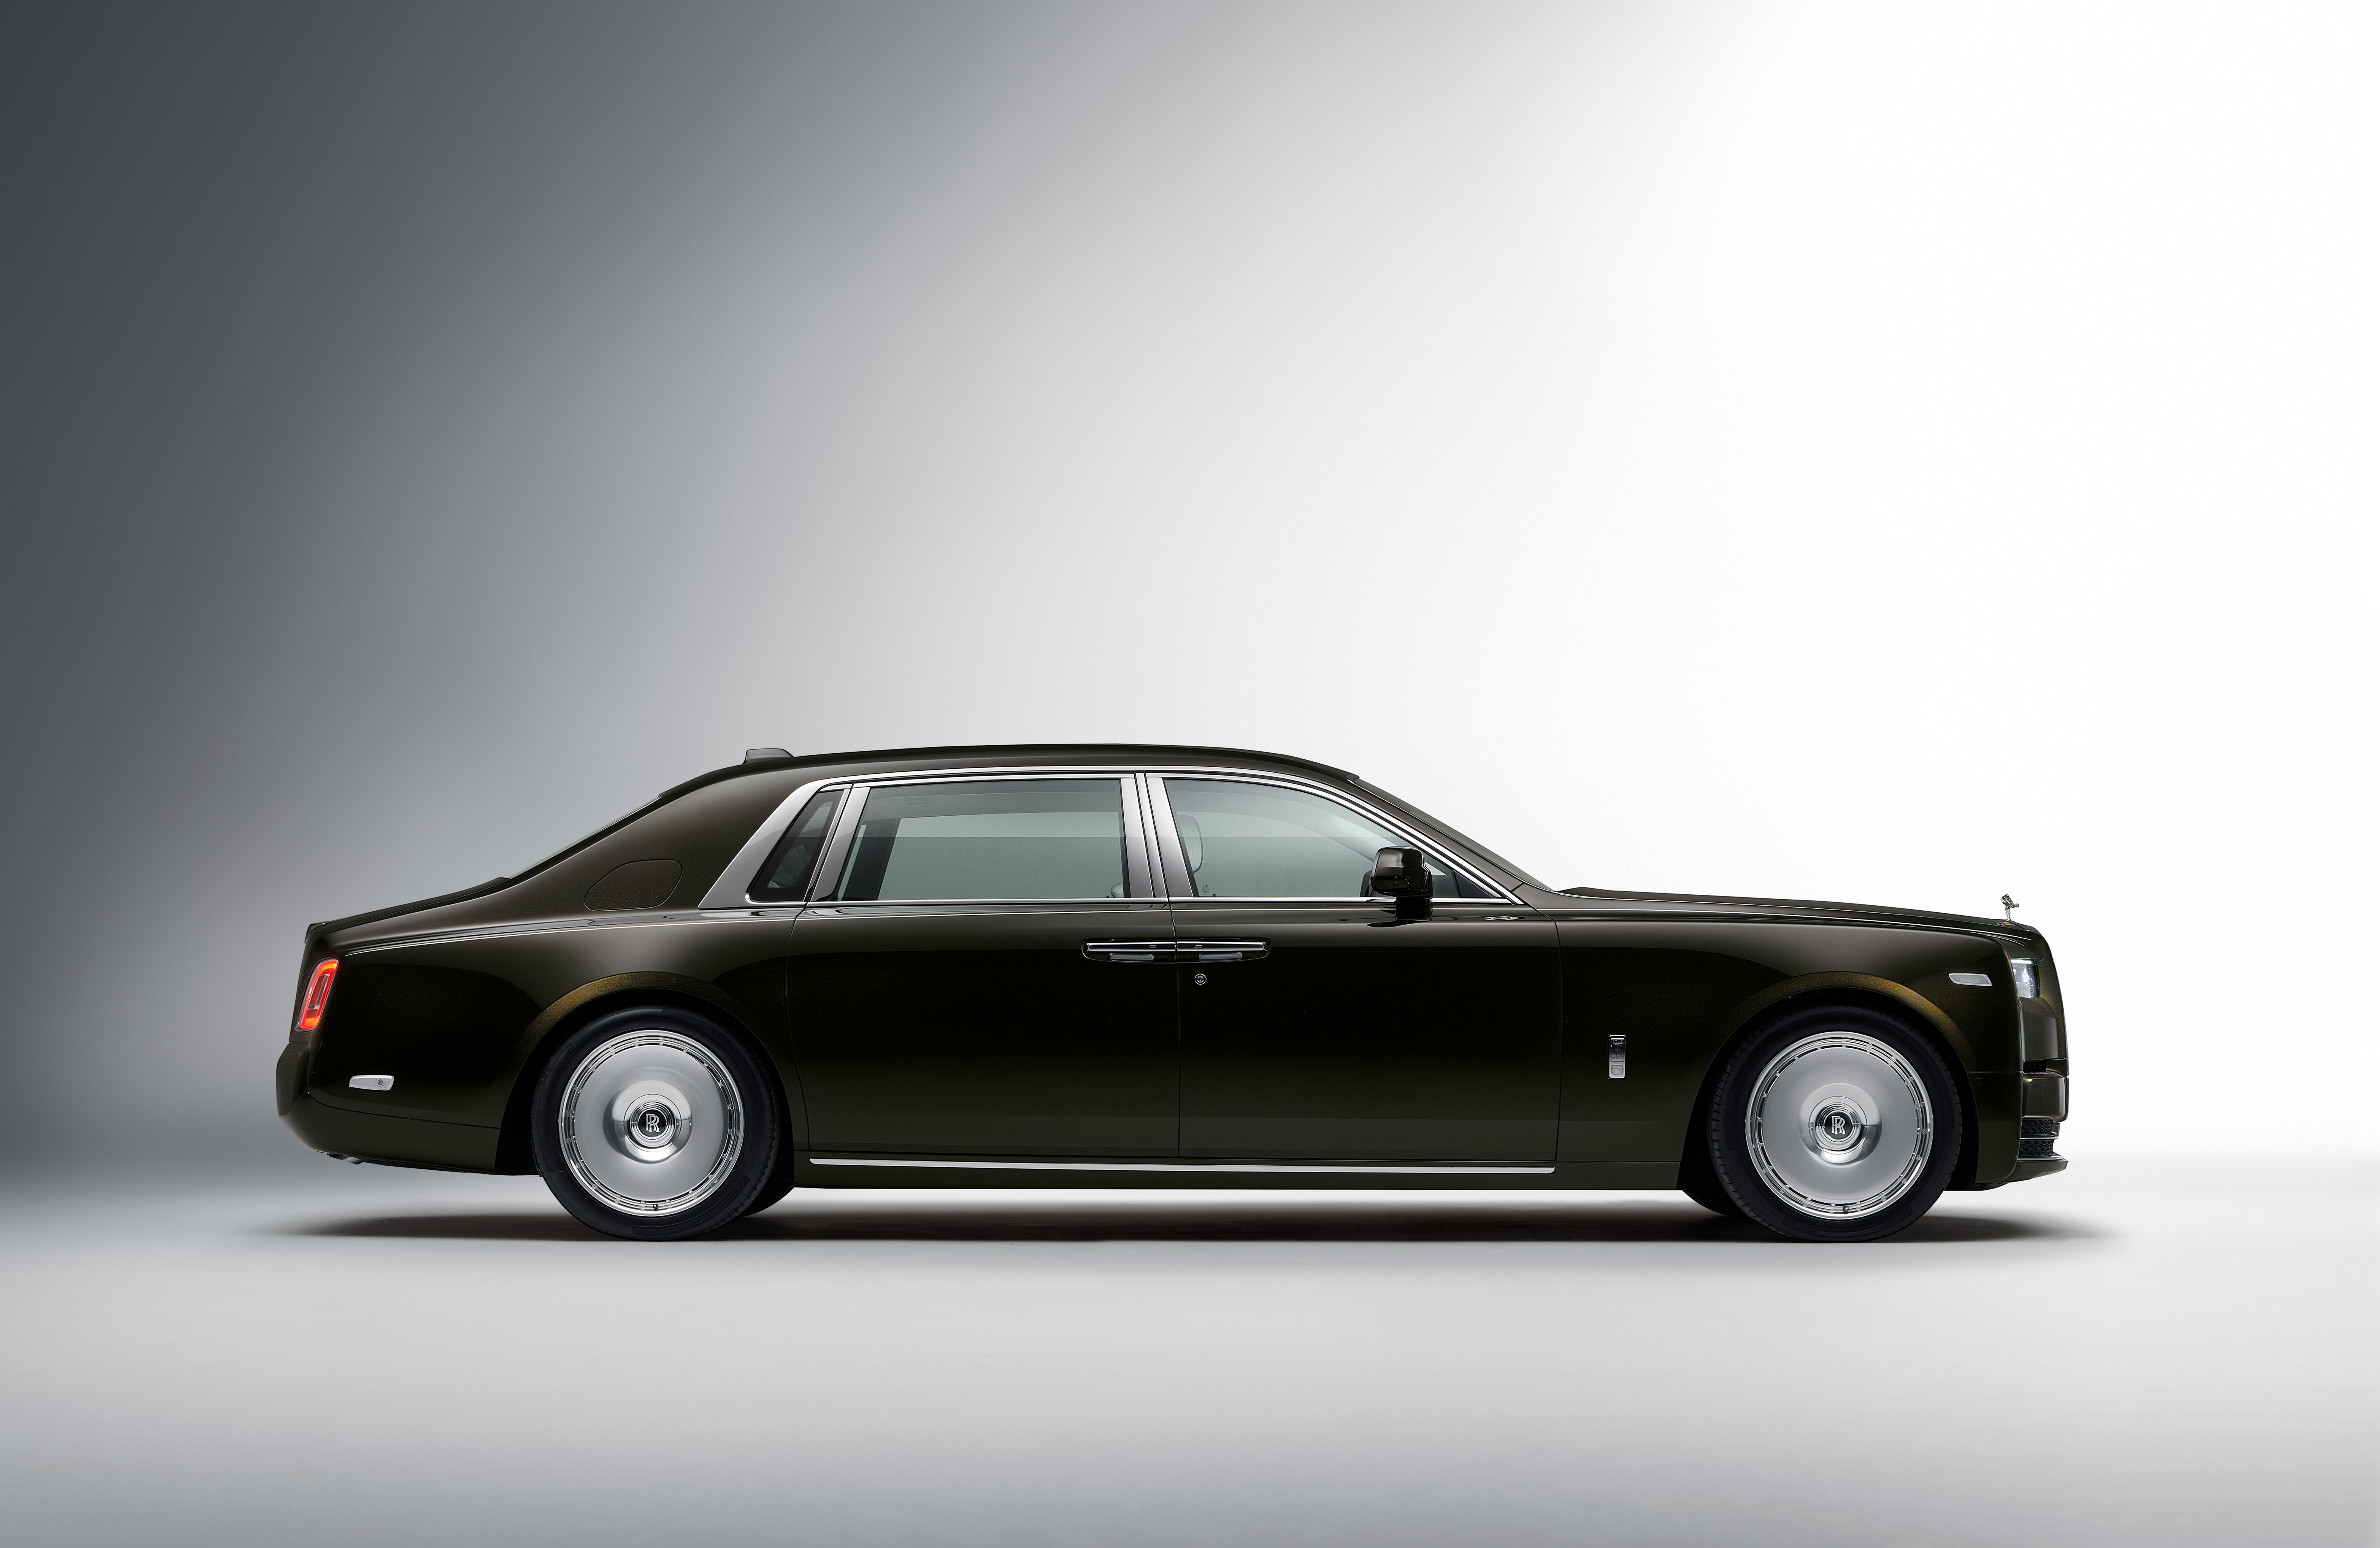 RollsRoyce Car Price Images Reviews and Specs  Autocar India